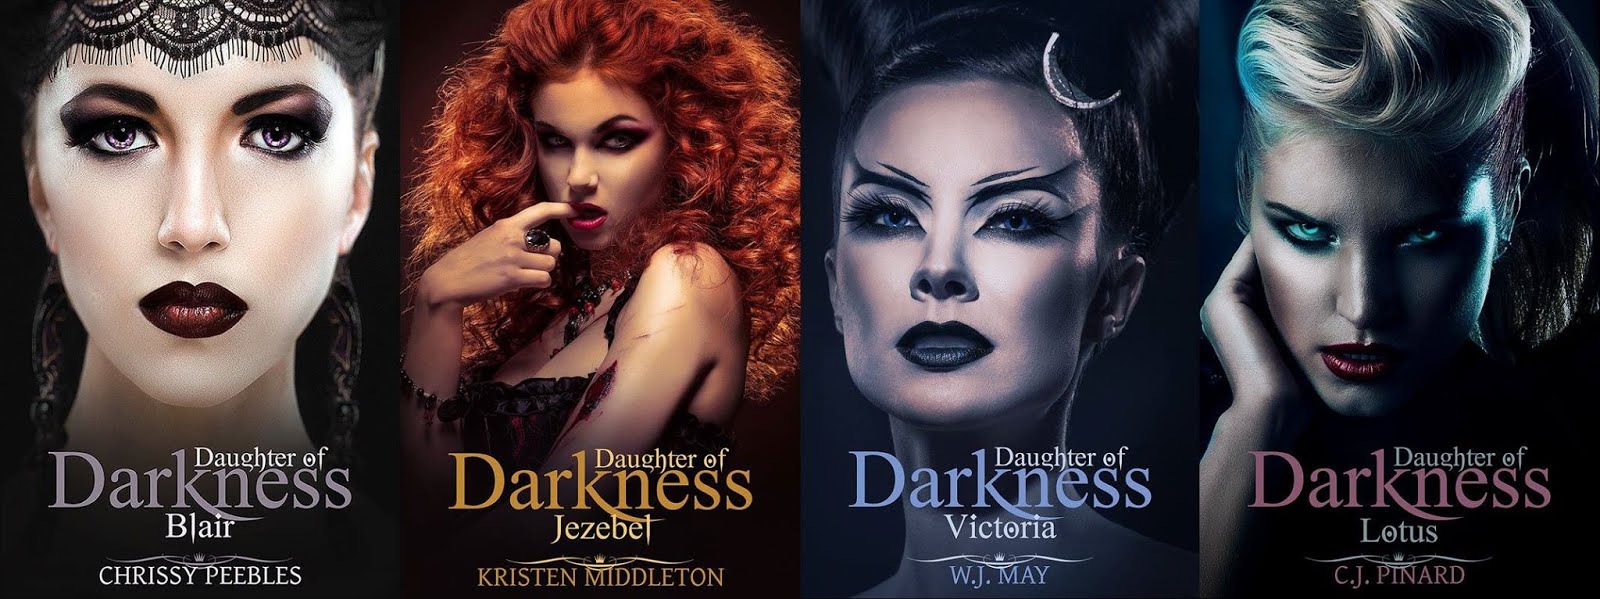 Daughters of Darkness (4 different series written by 4 different authors)